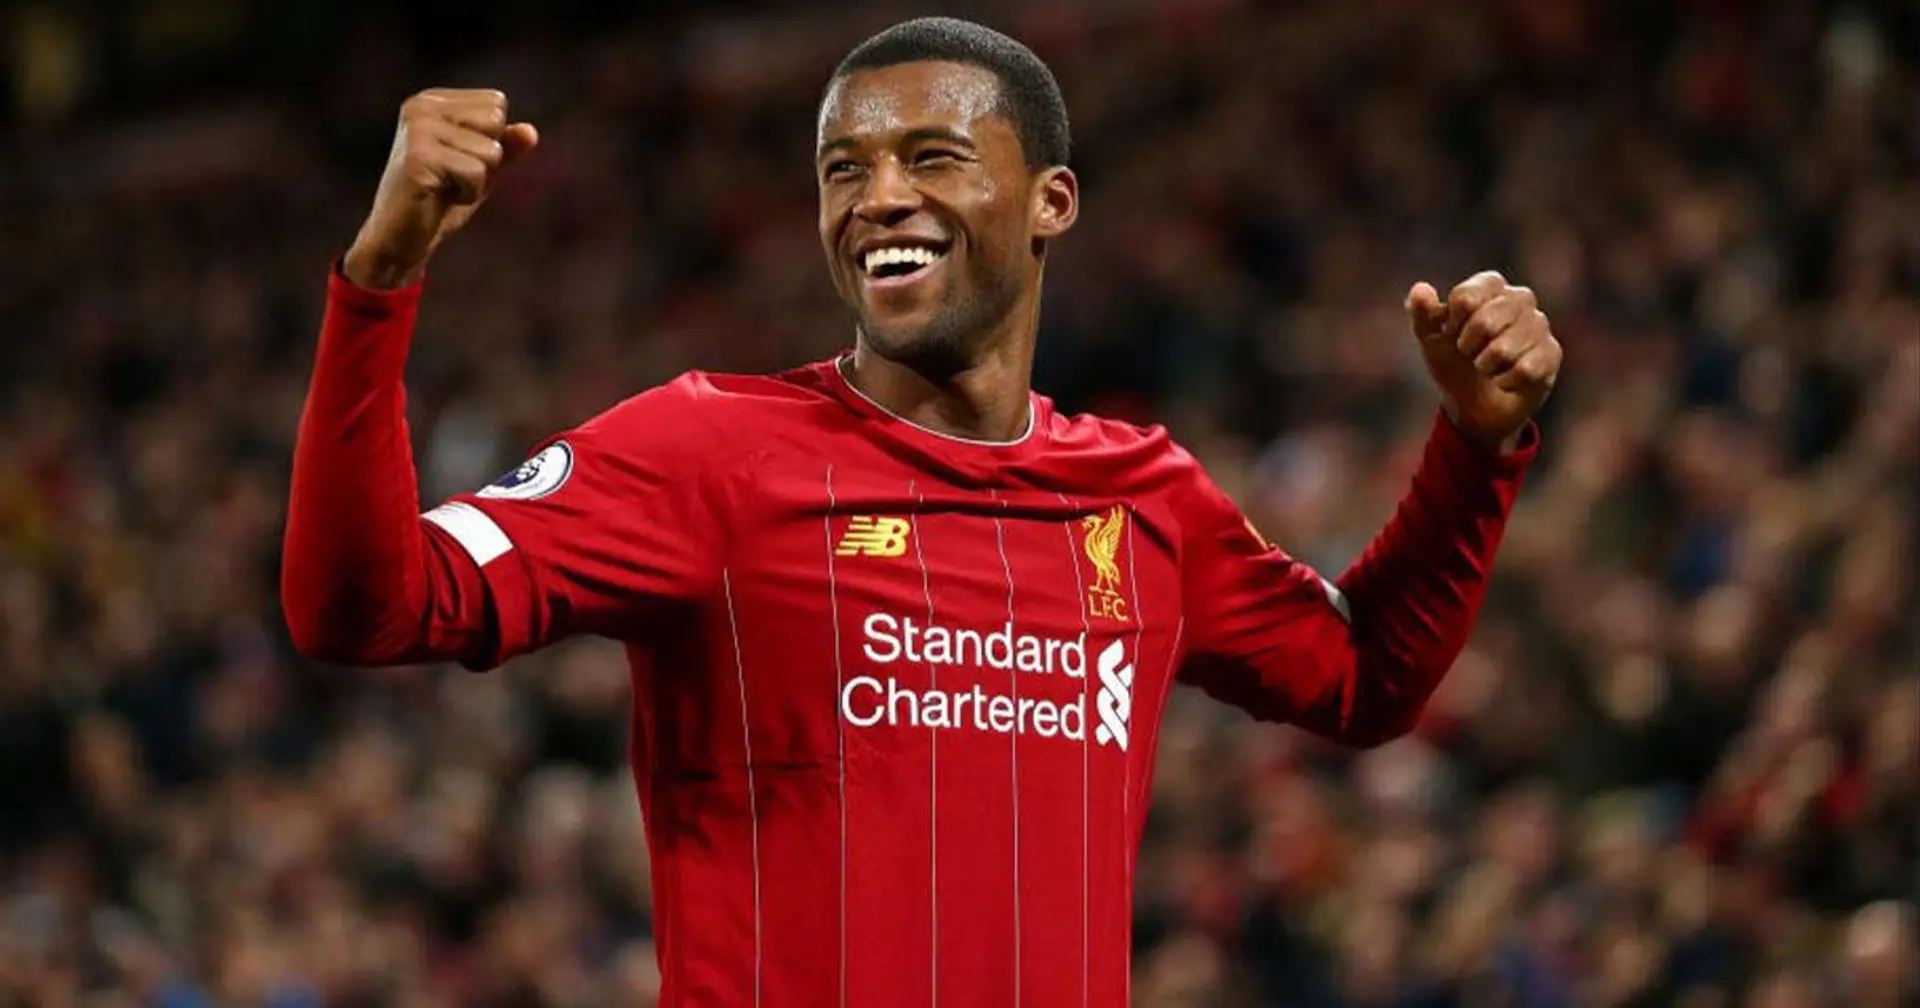 Retaining Gini is a no brainer